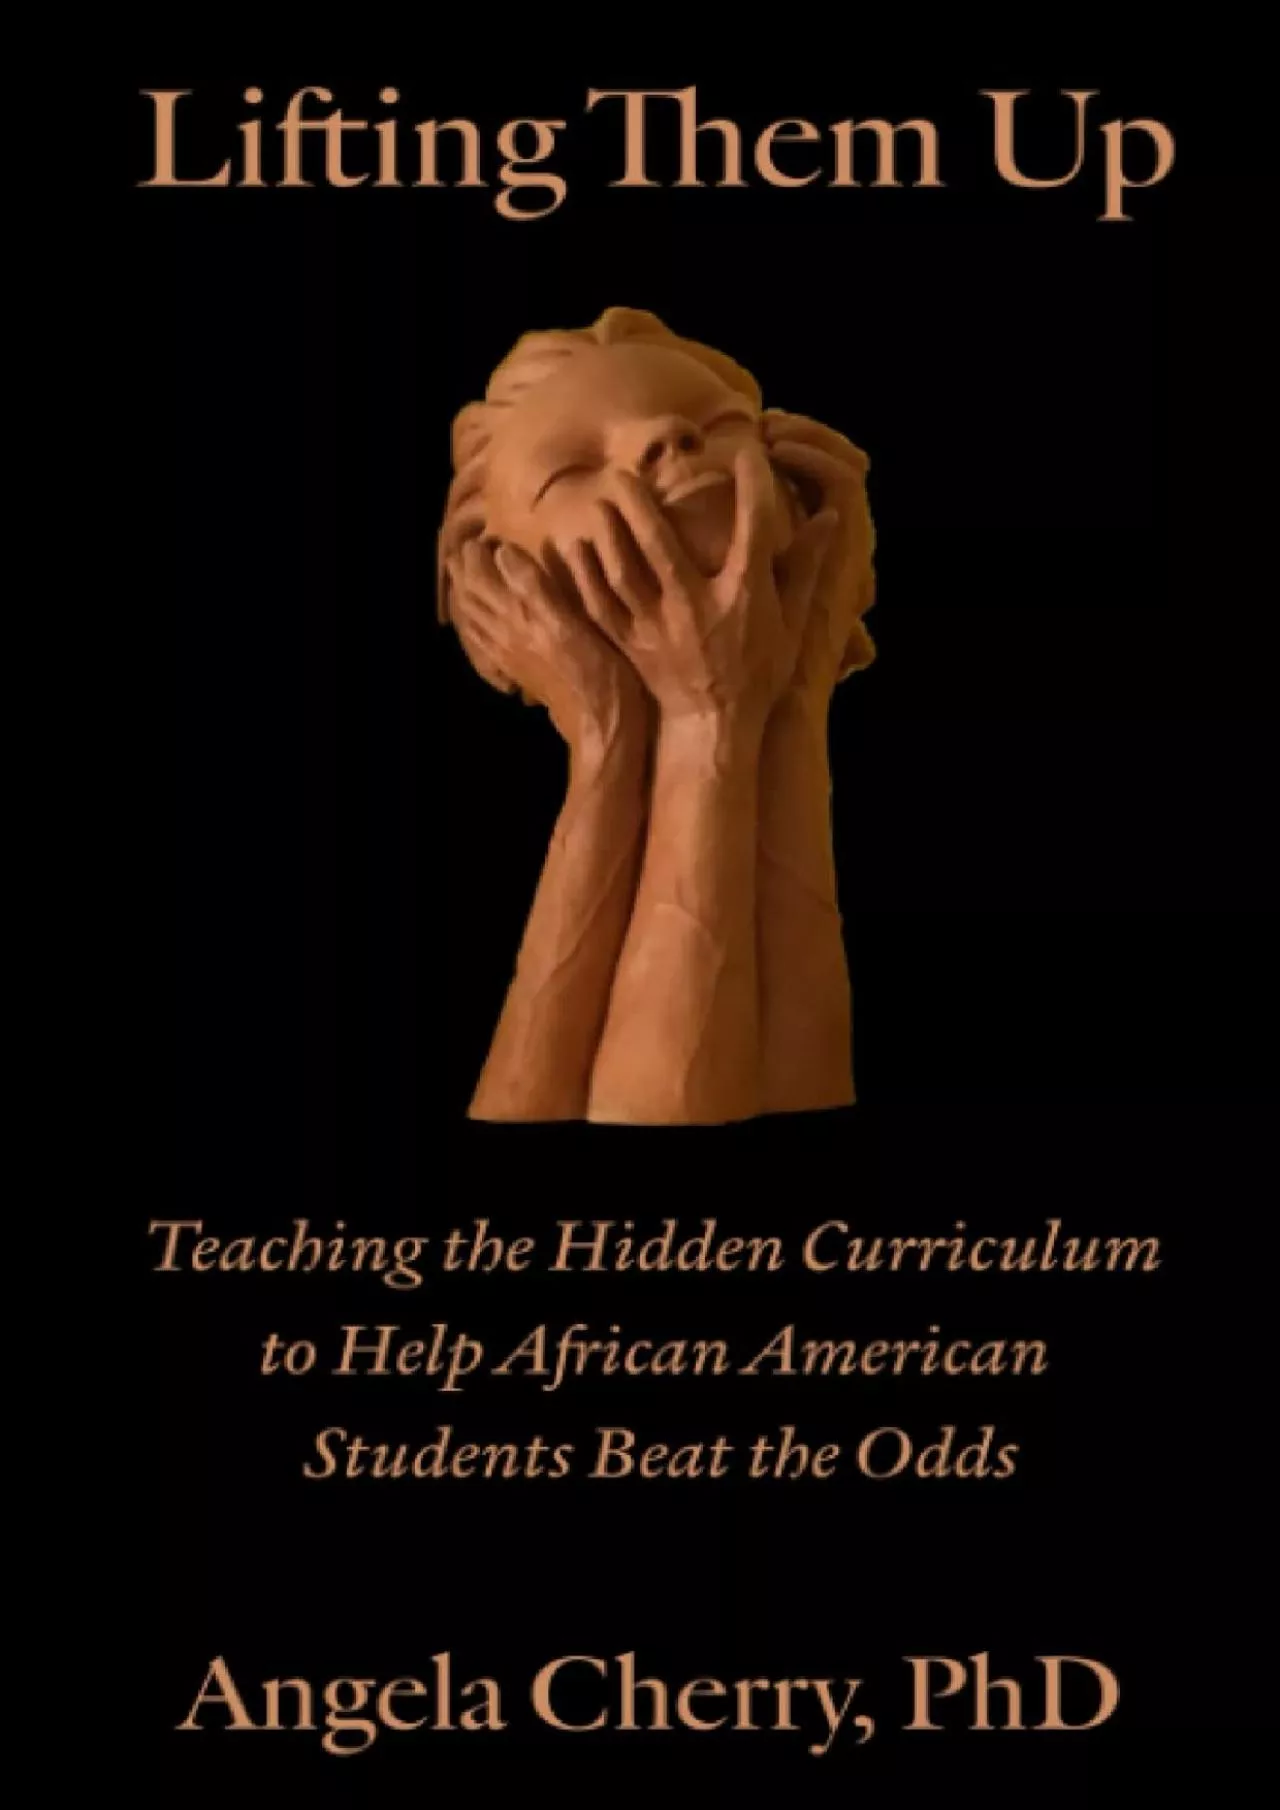 [EBOOK] Lifting Them Up: Teaching the Hidden Curriculum to Help African American Students